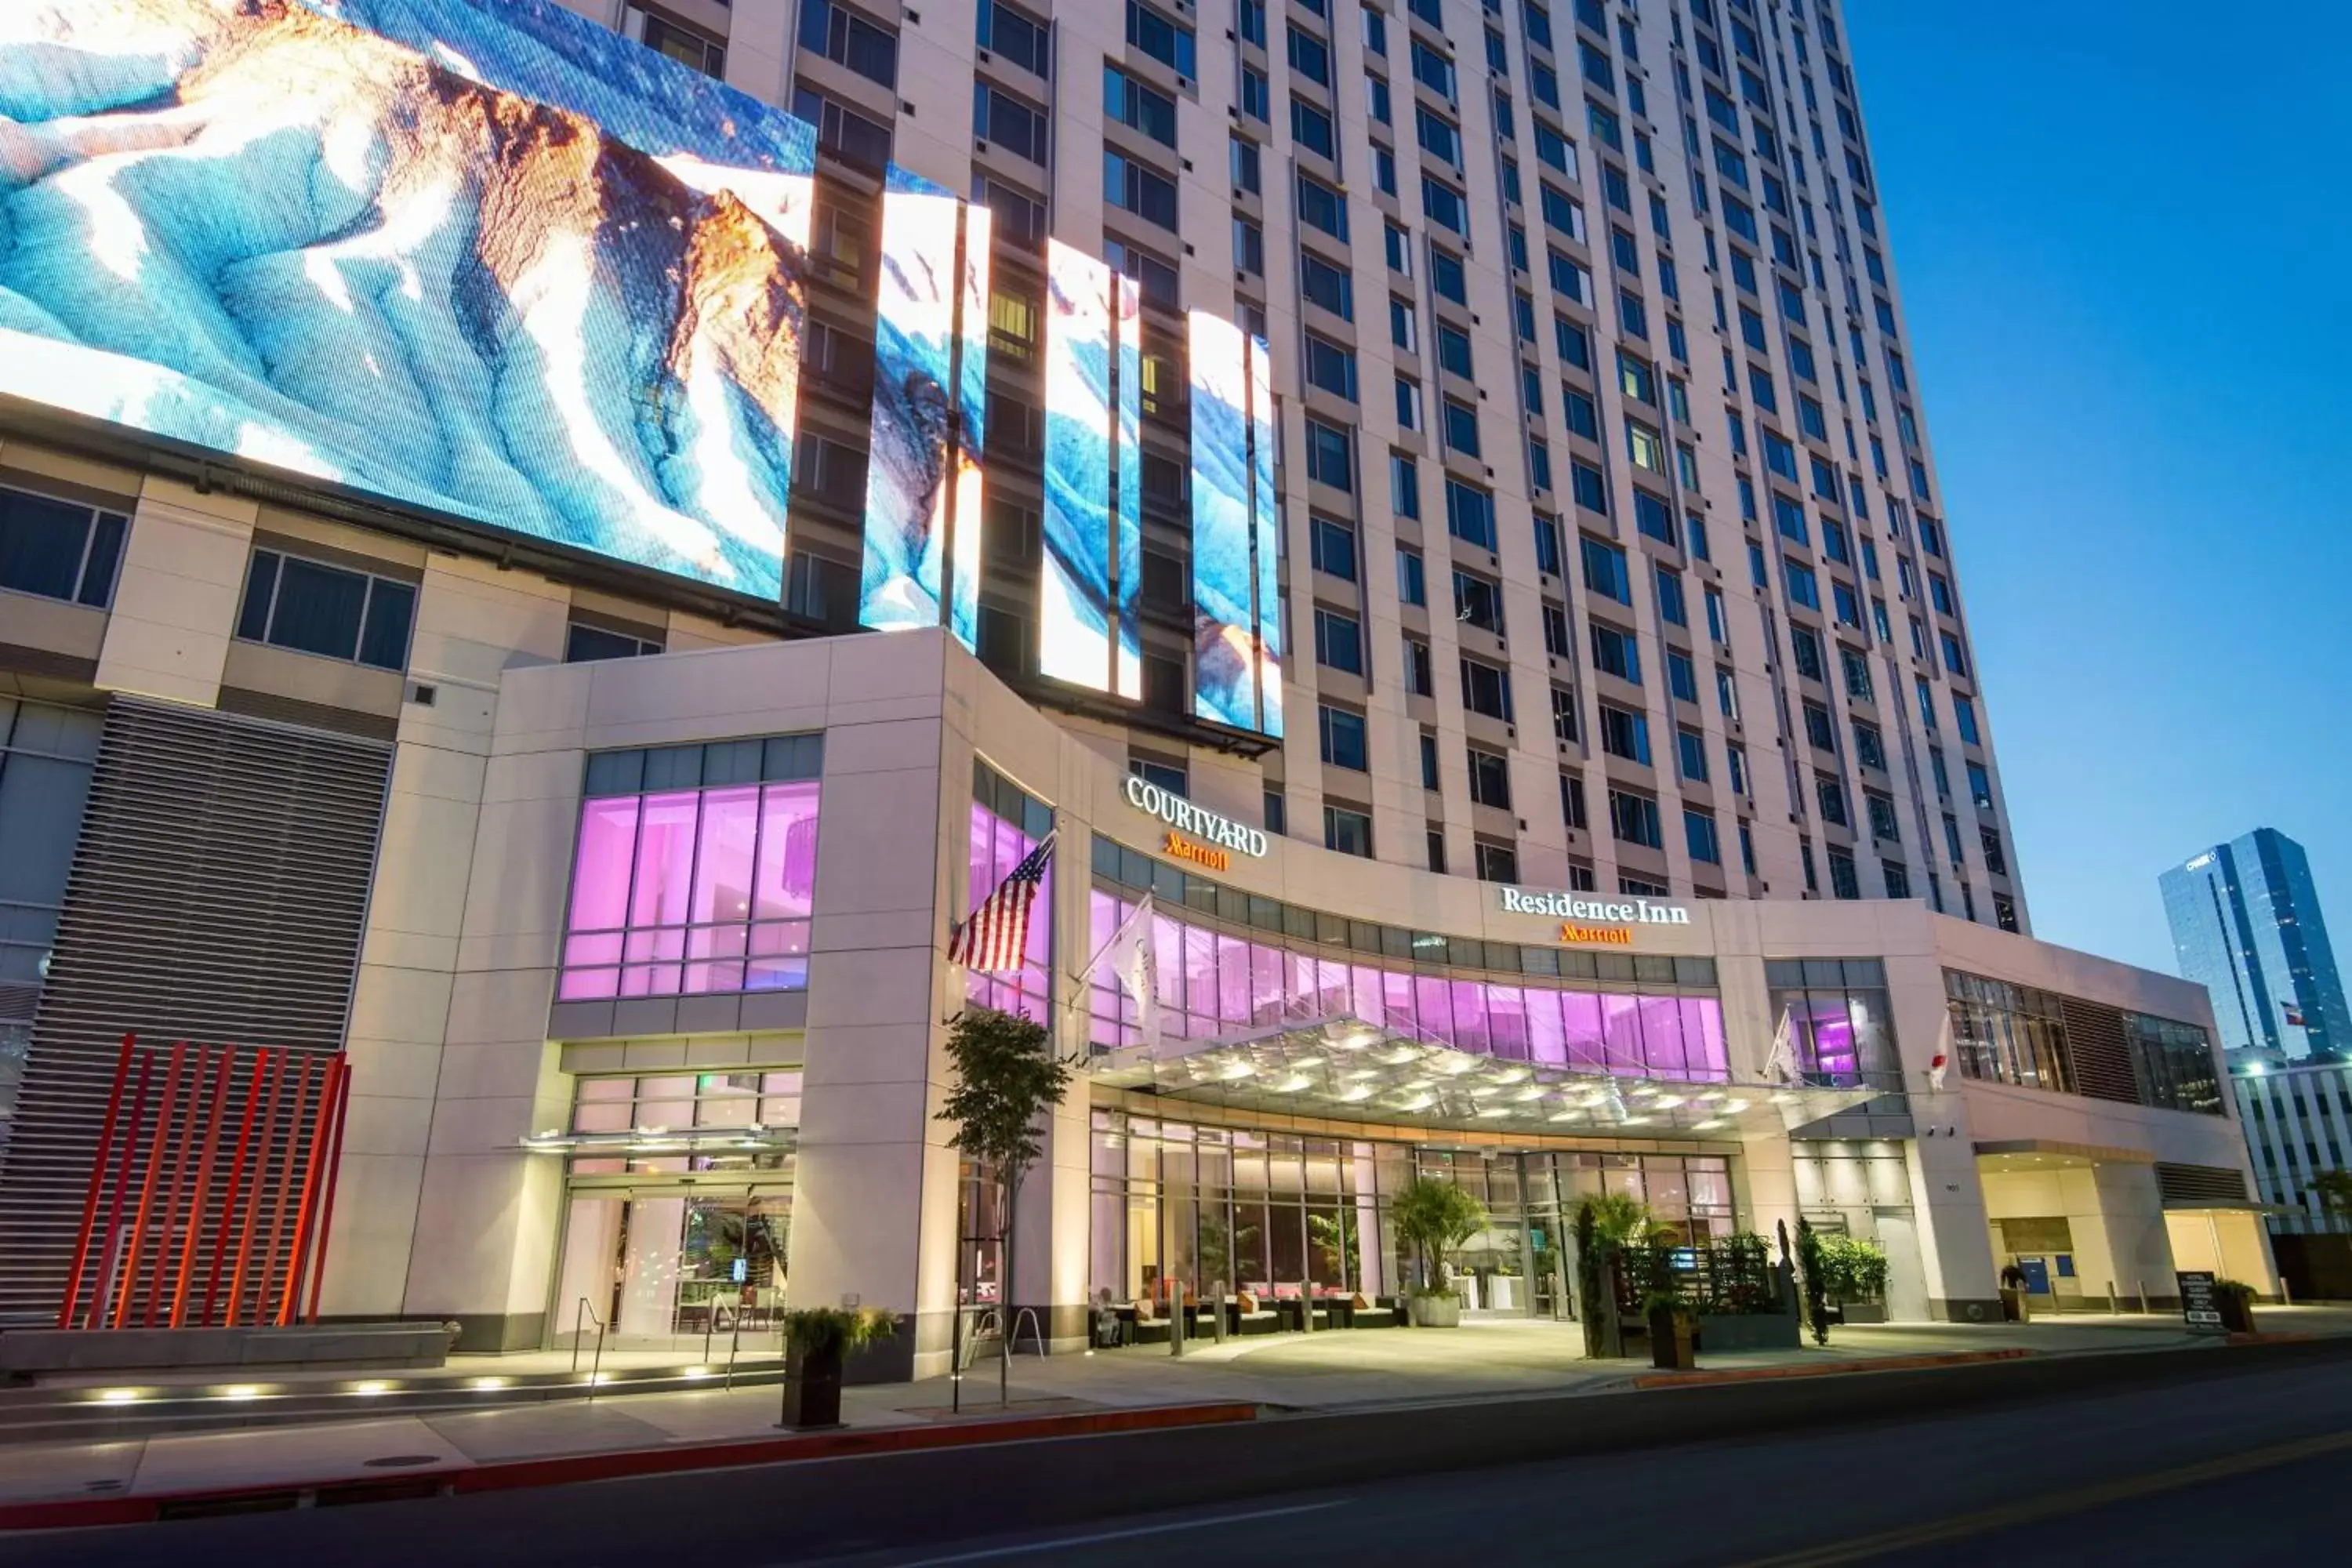 Property Building in Residence Inn by Marriott Los Angeles L.A. LIVE